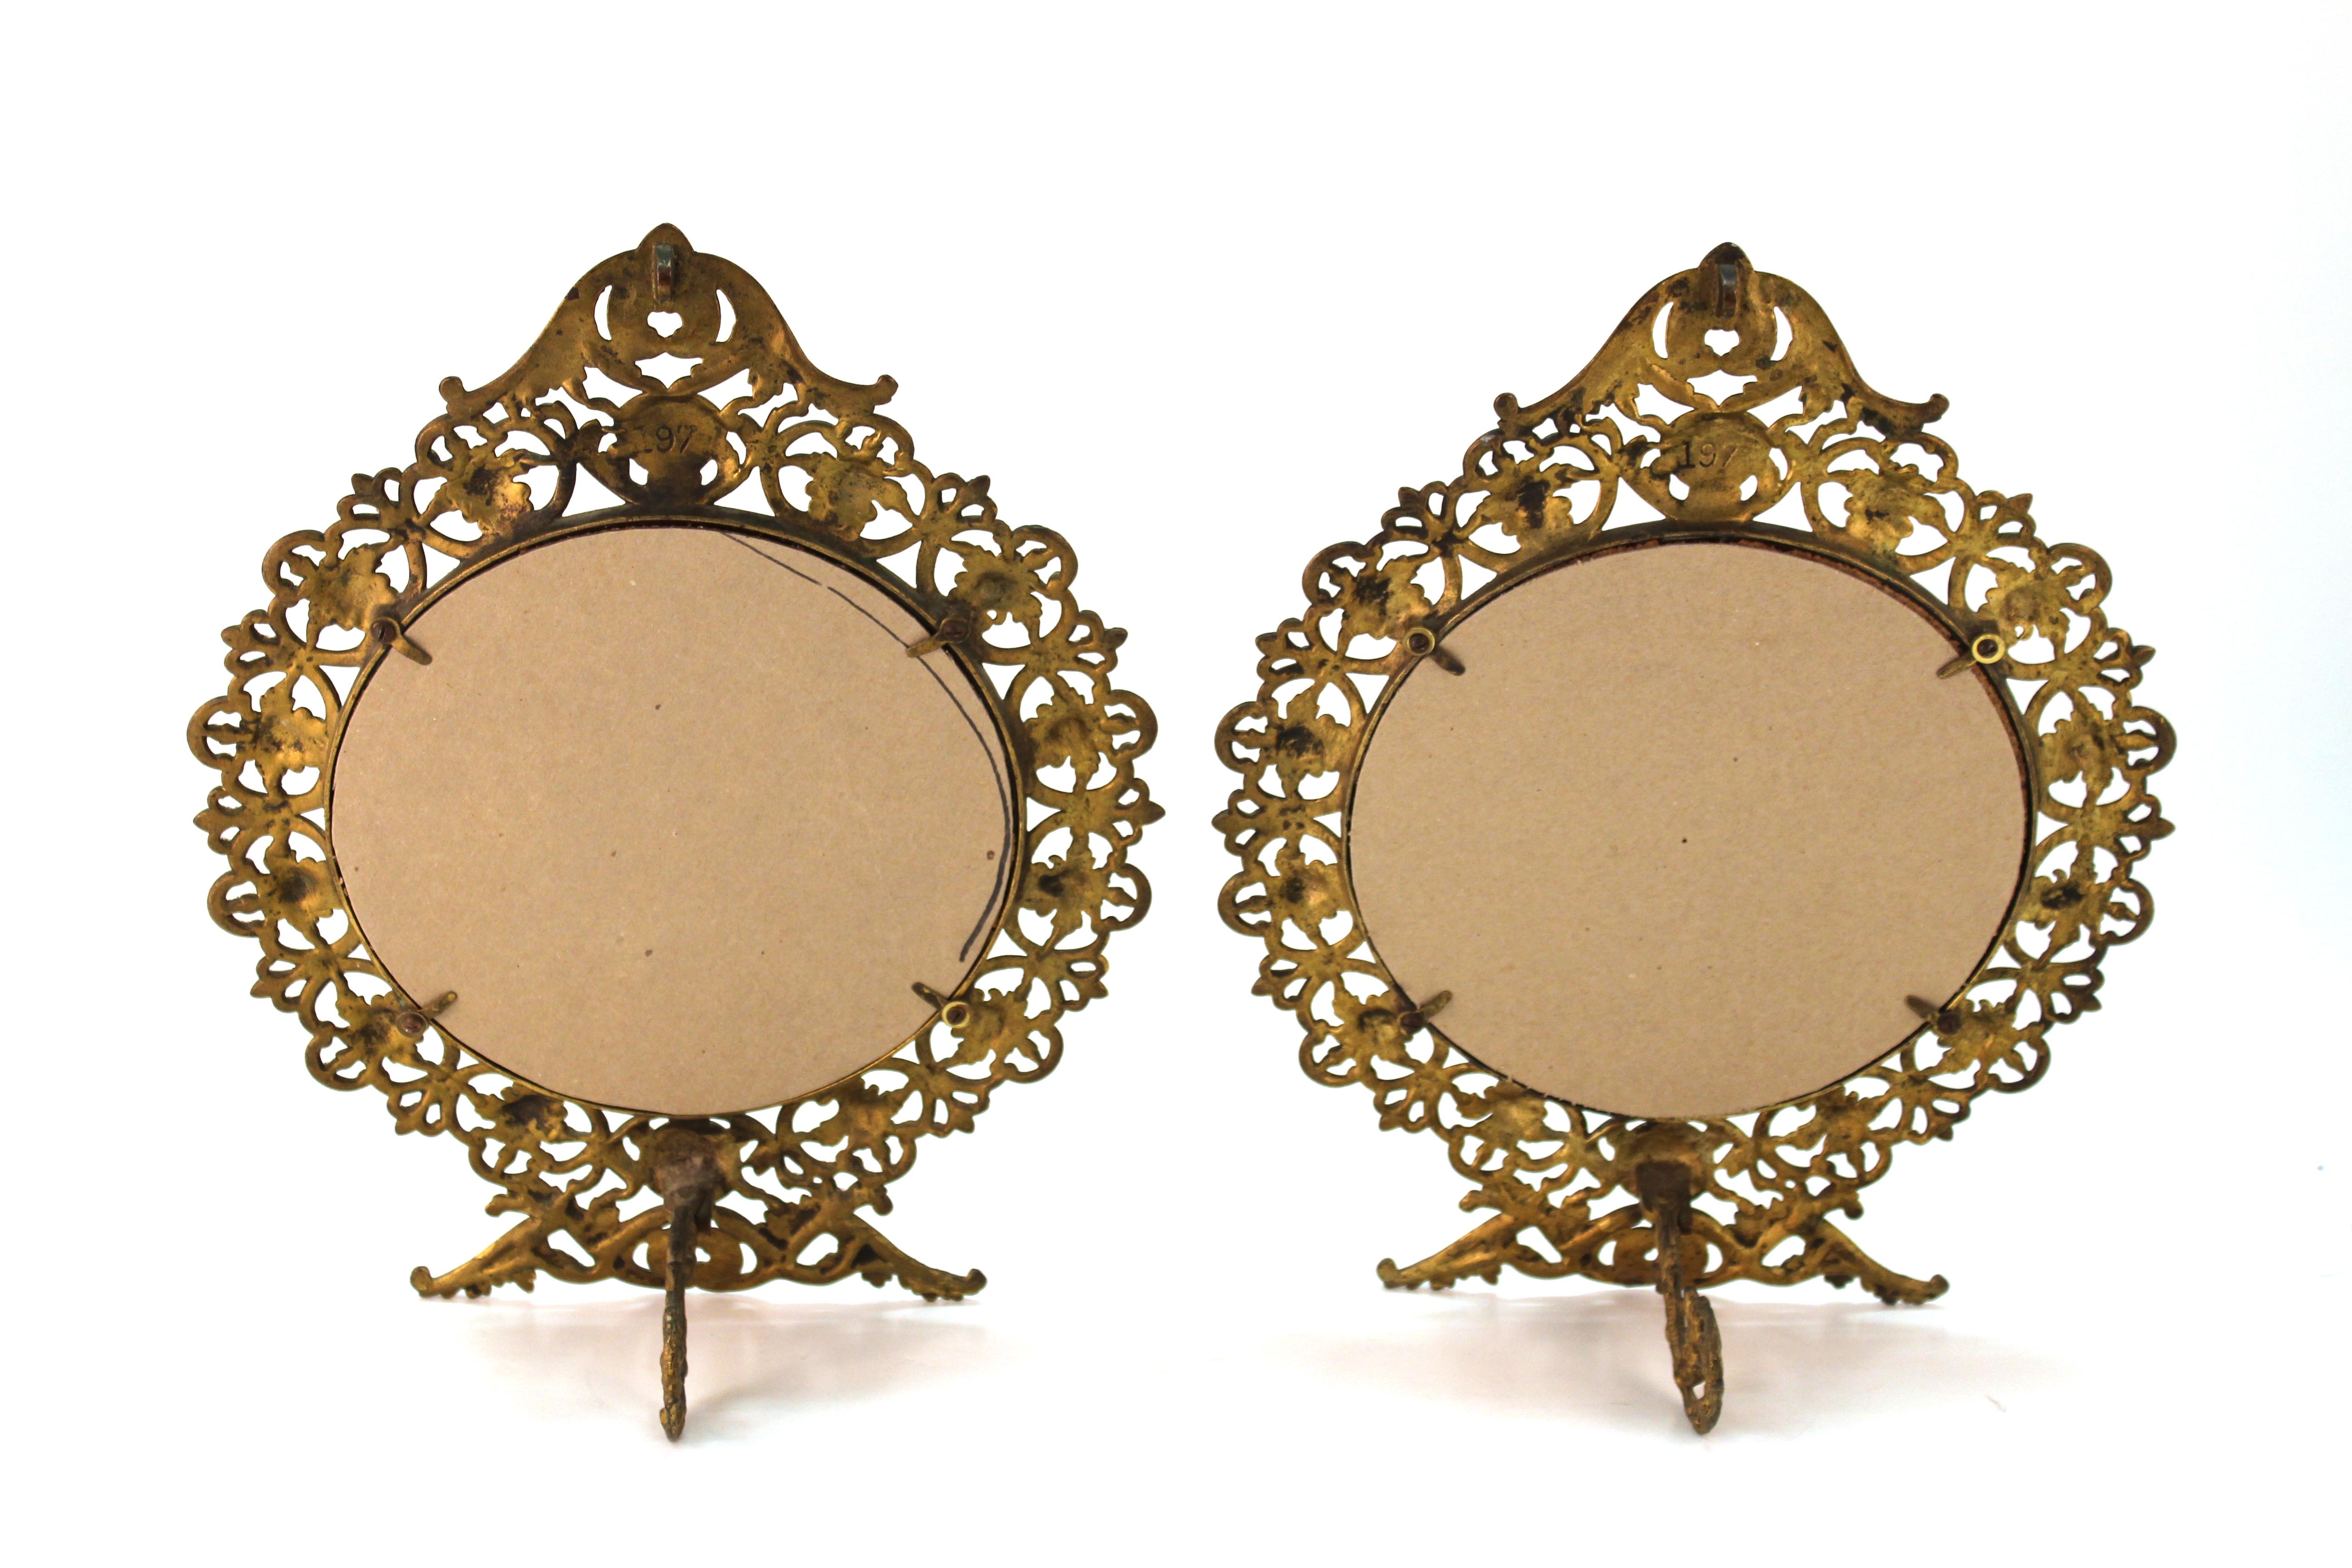 Late 19th Century American Victorian Round Gilt Metal Table Mirrors